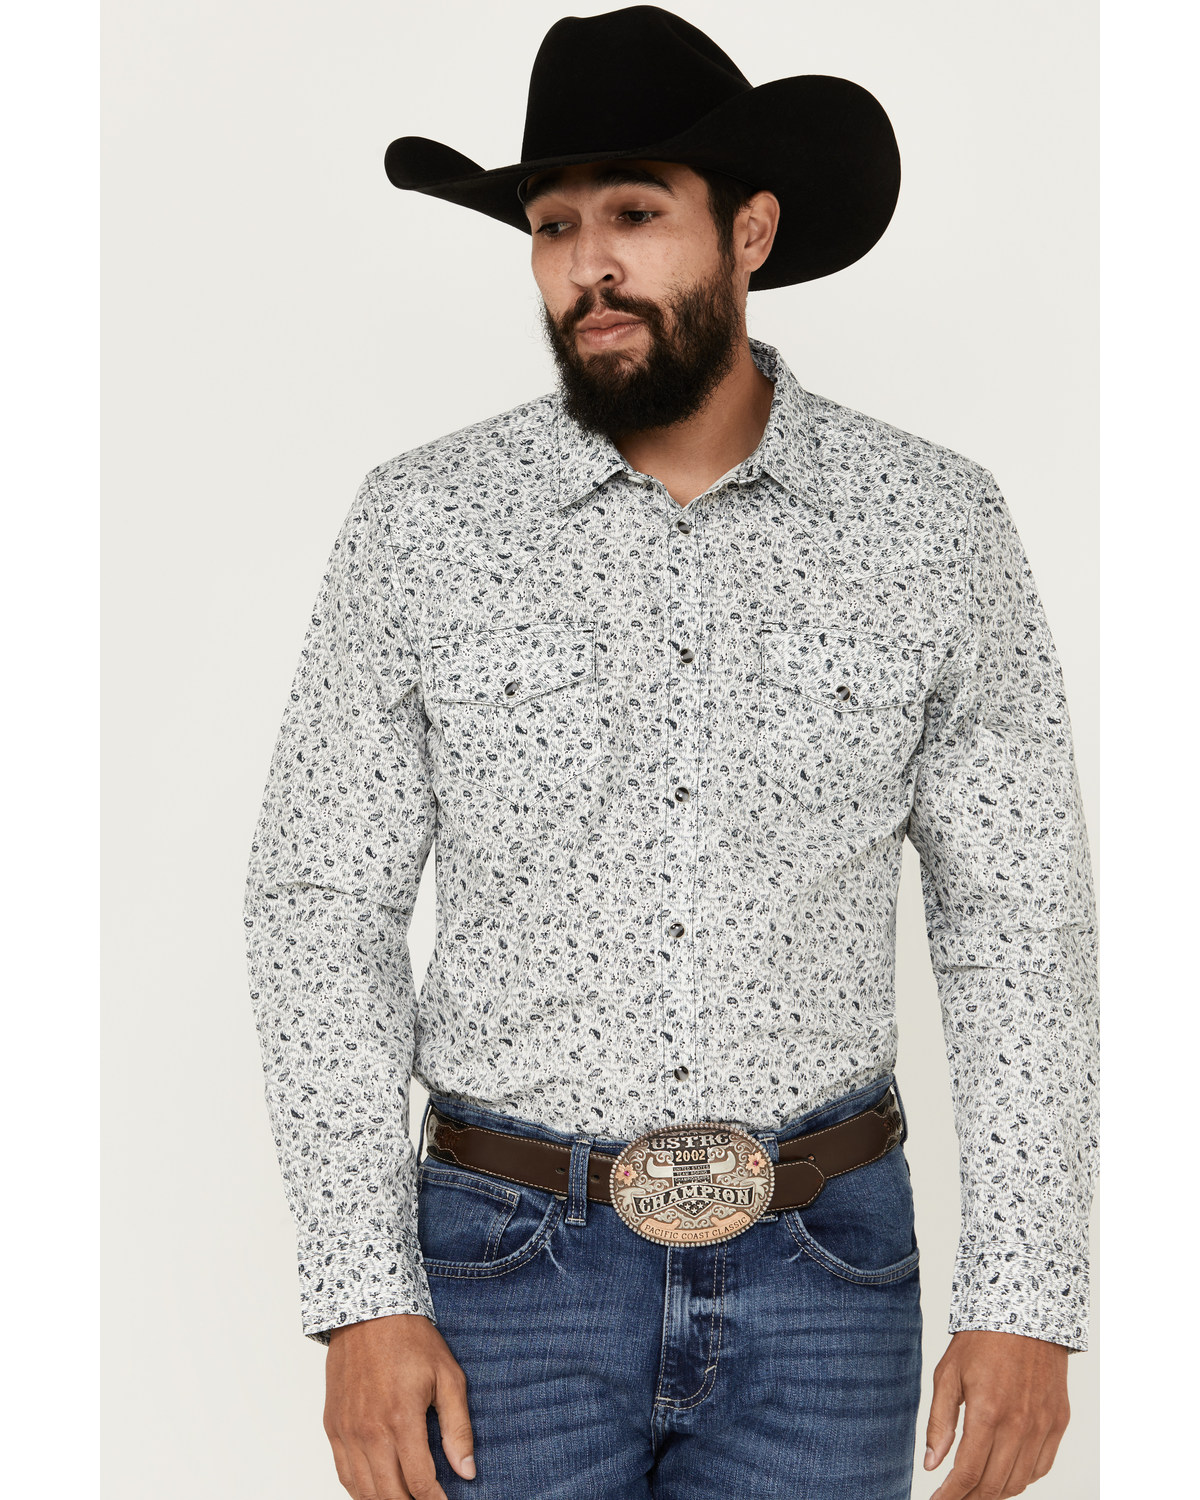 Gibson Trading Co Men's Static Paisley Floral Print Long Sleeve Pearl Snap Western Shirt